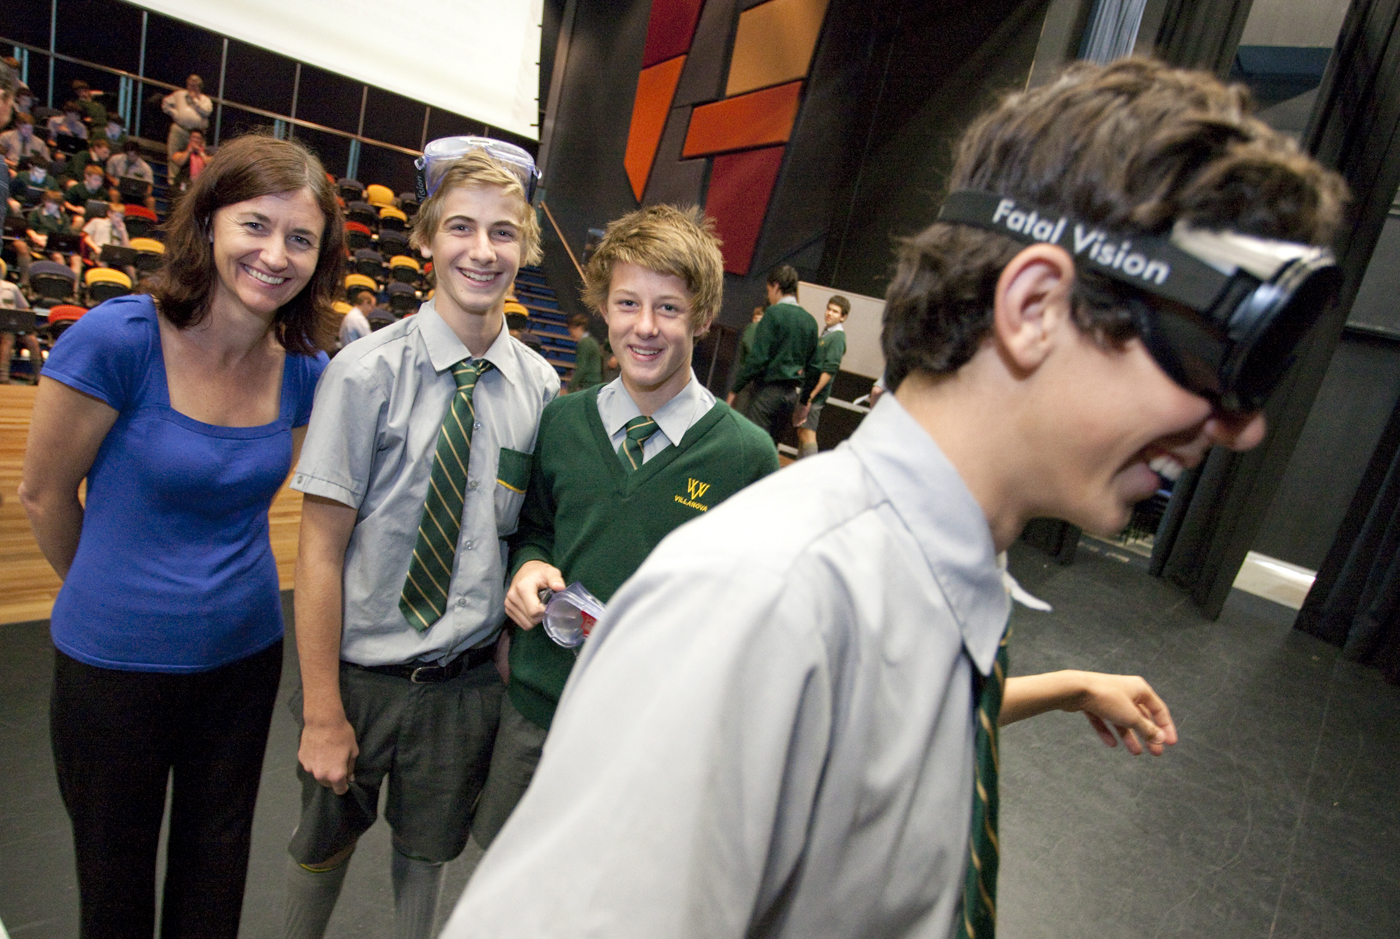 Teenage boy walks wearing goggles, watched by two teens and adult in background.